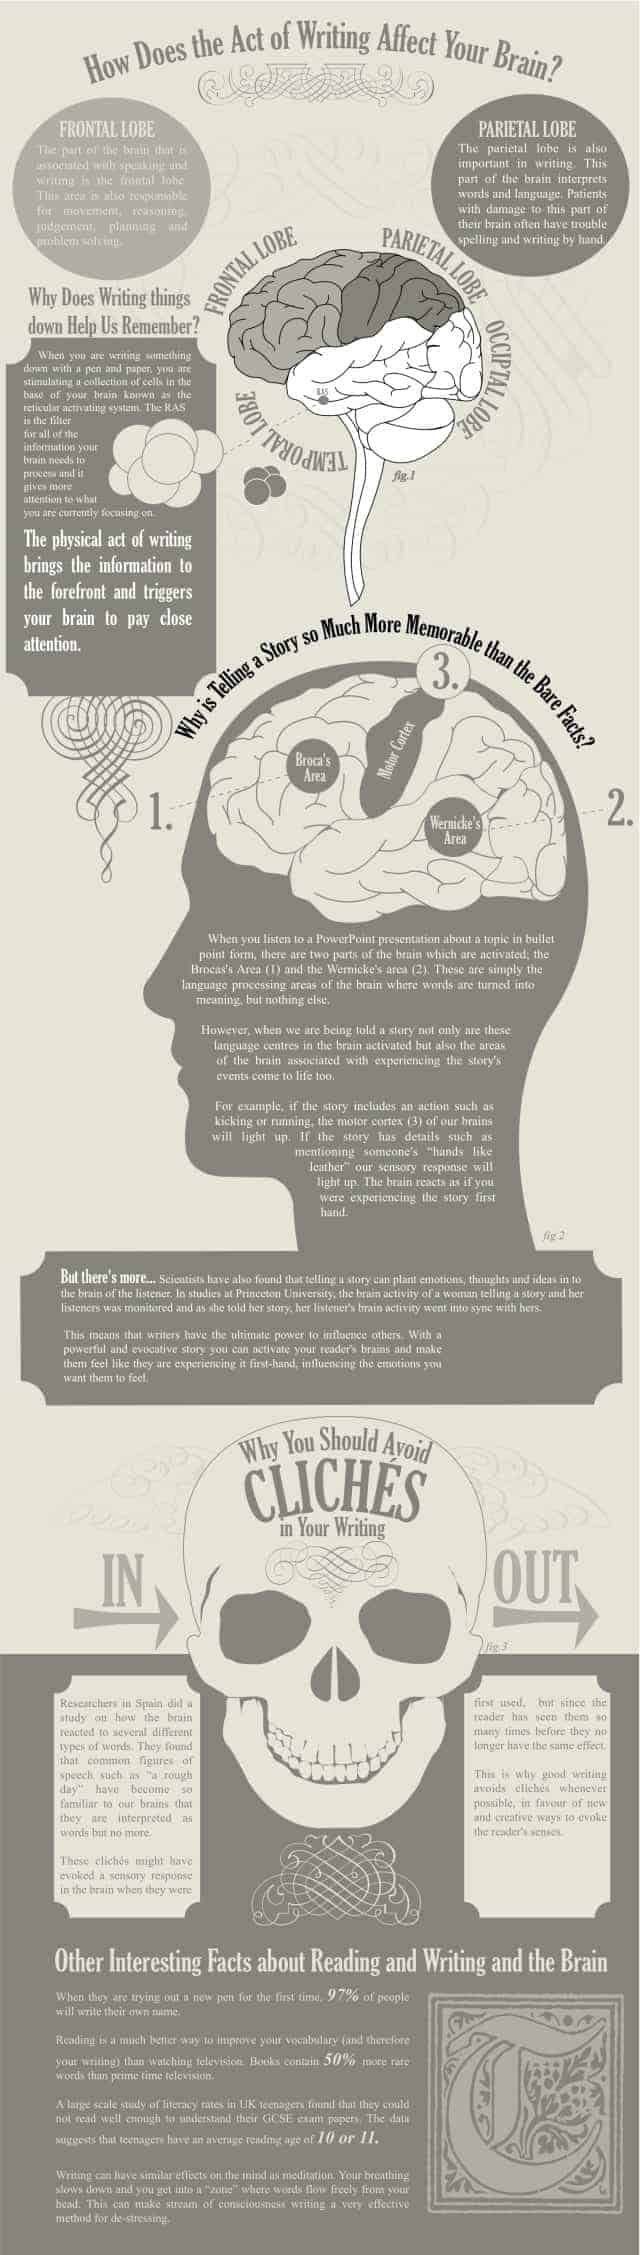 How Does Writing Affect Your Brain